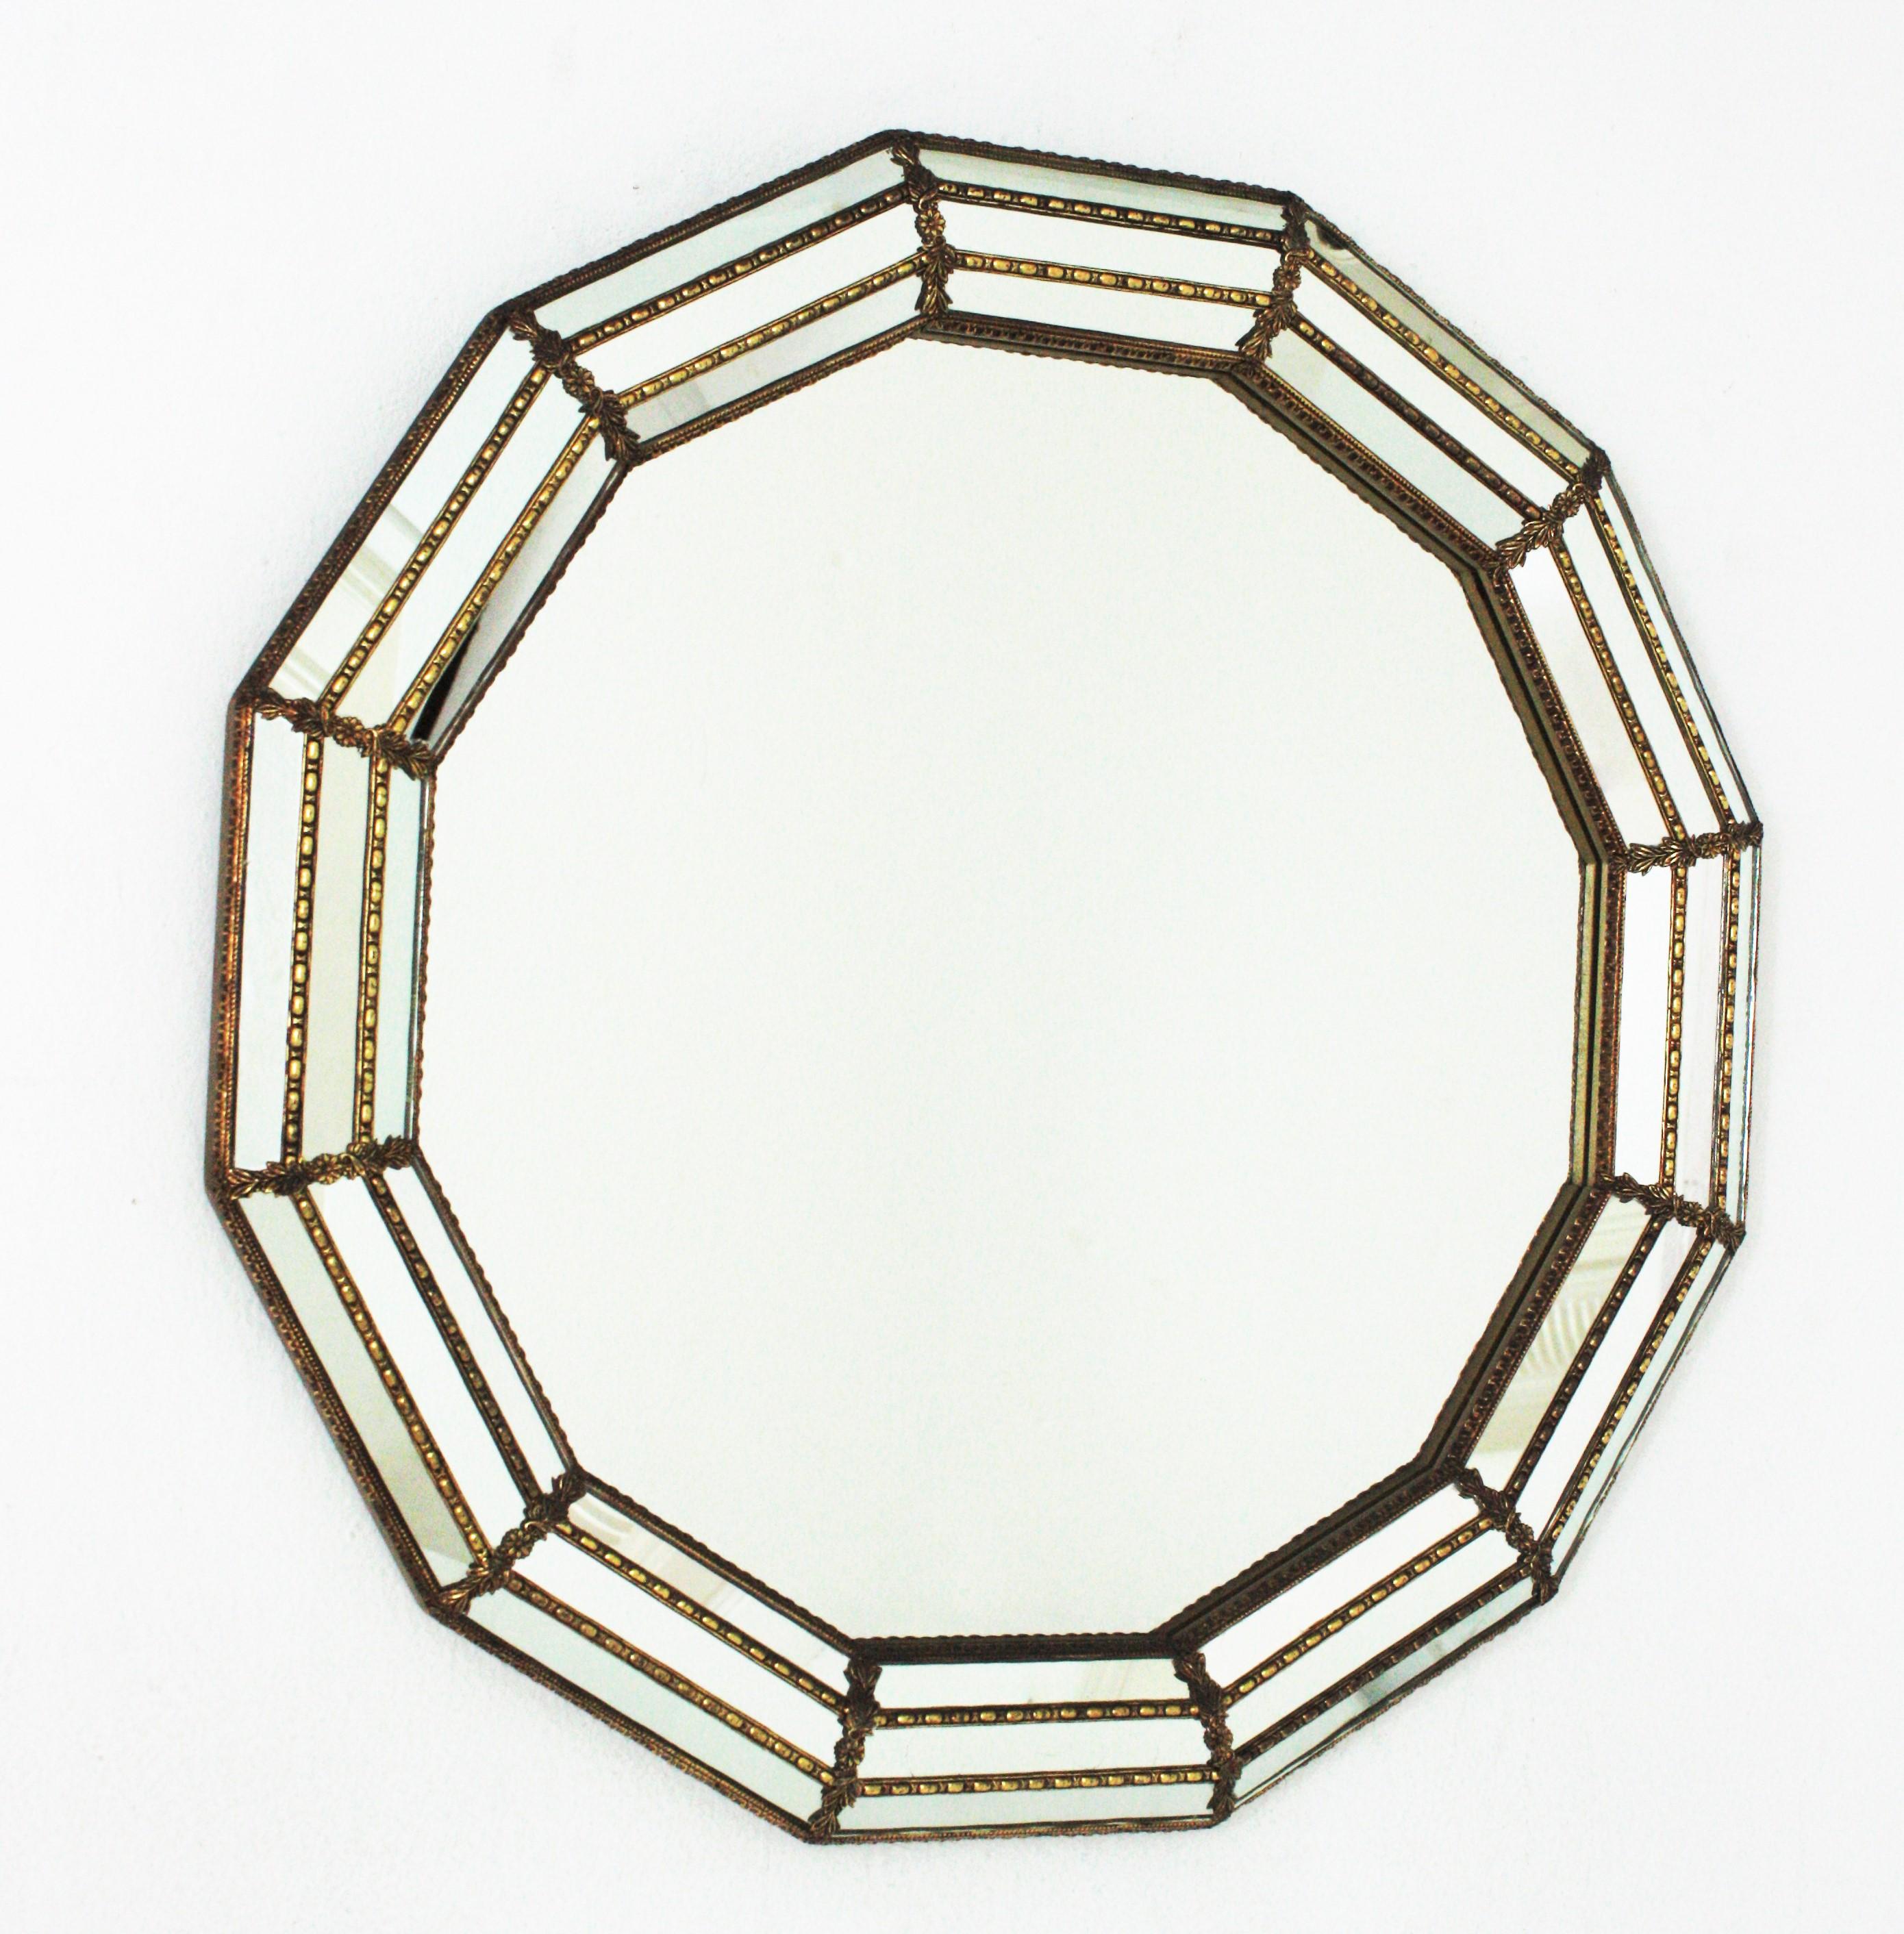 Venetian style 12-sided wall mirror with gilt metal accents, Spain, 1950s
This eye-catching dodecagon mirror has a triple mirror frame. The mirrored panels are adorned by metal patterns and flowers.
This wall mirror will be perfect in a contemporary